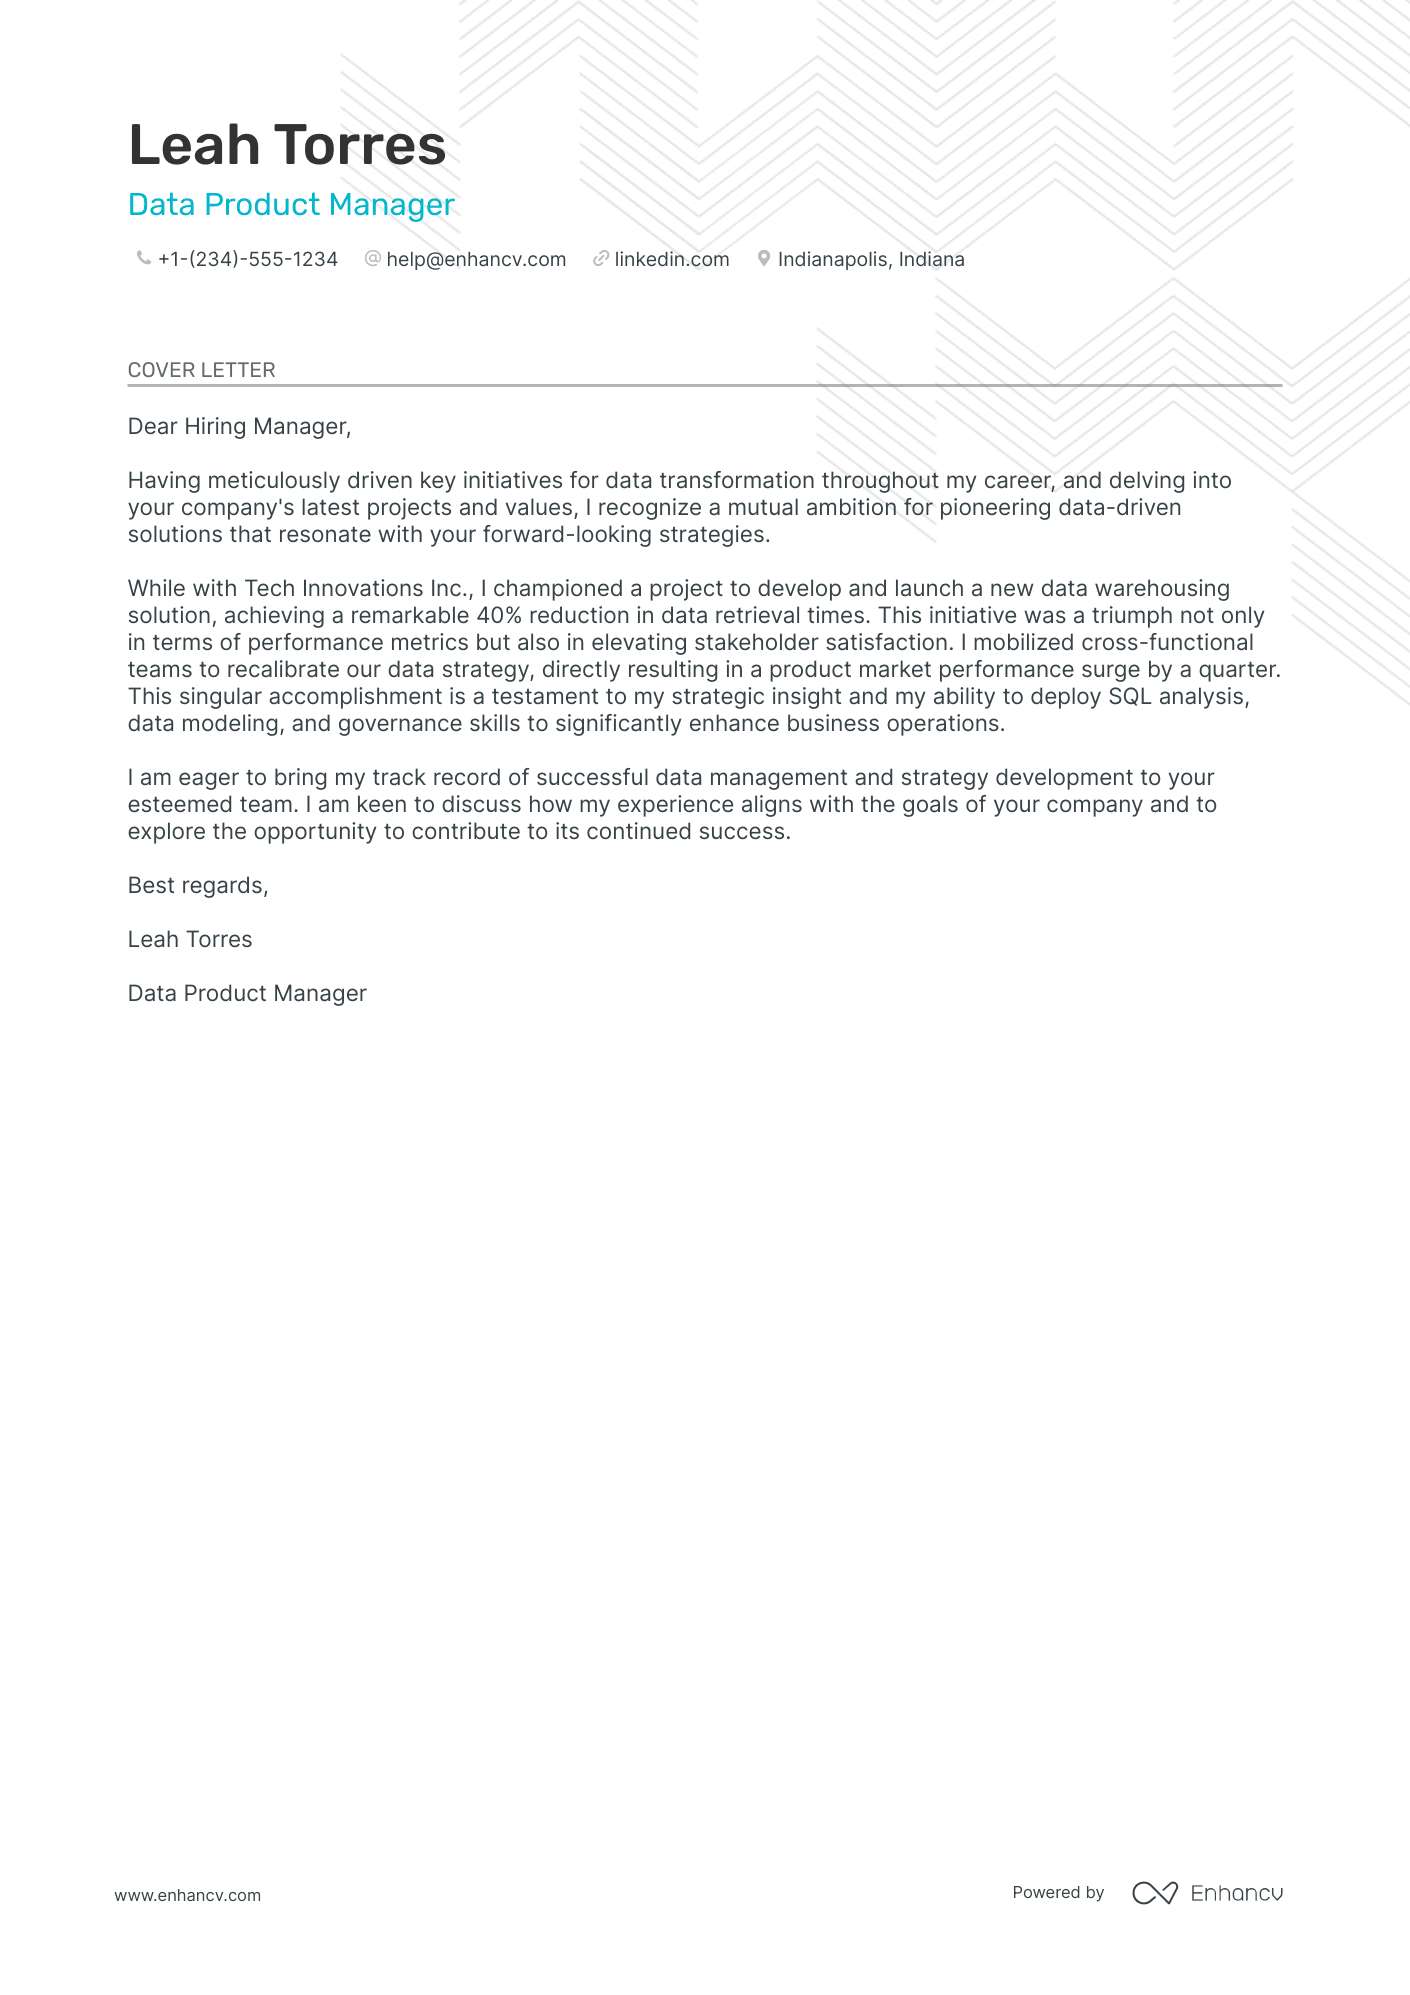 product management cover letter